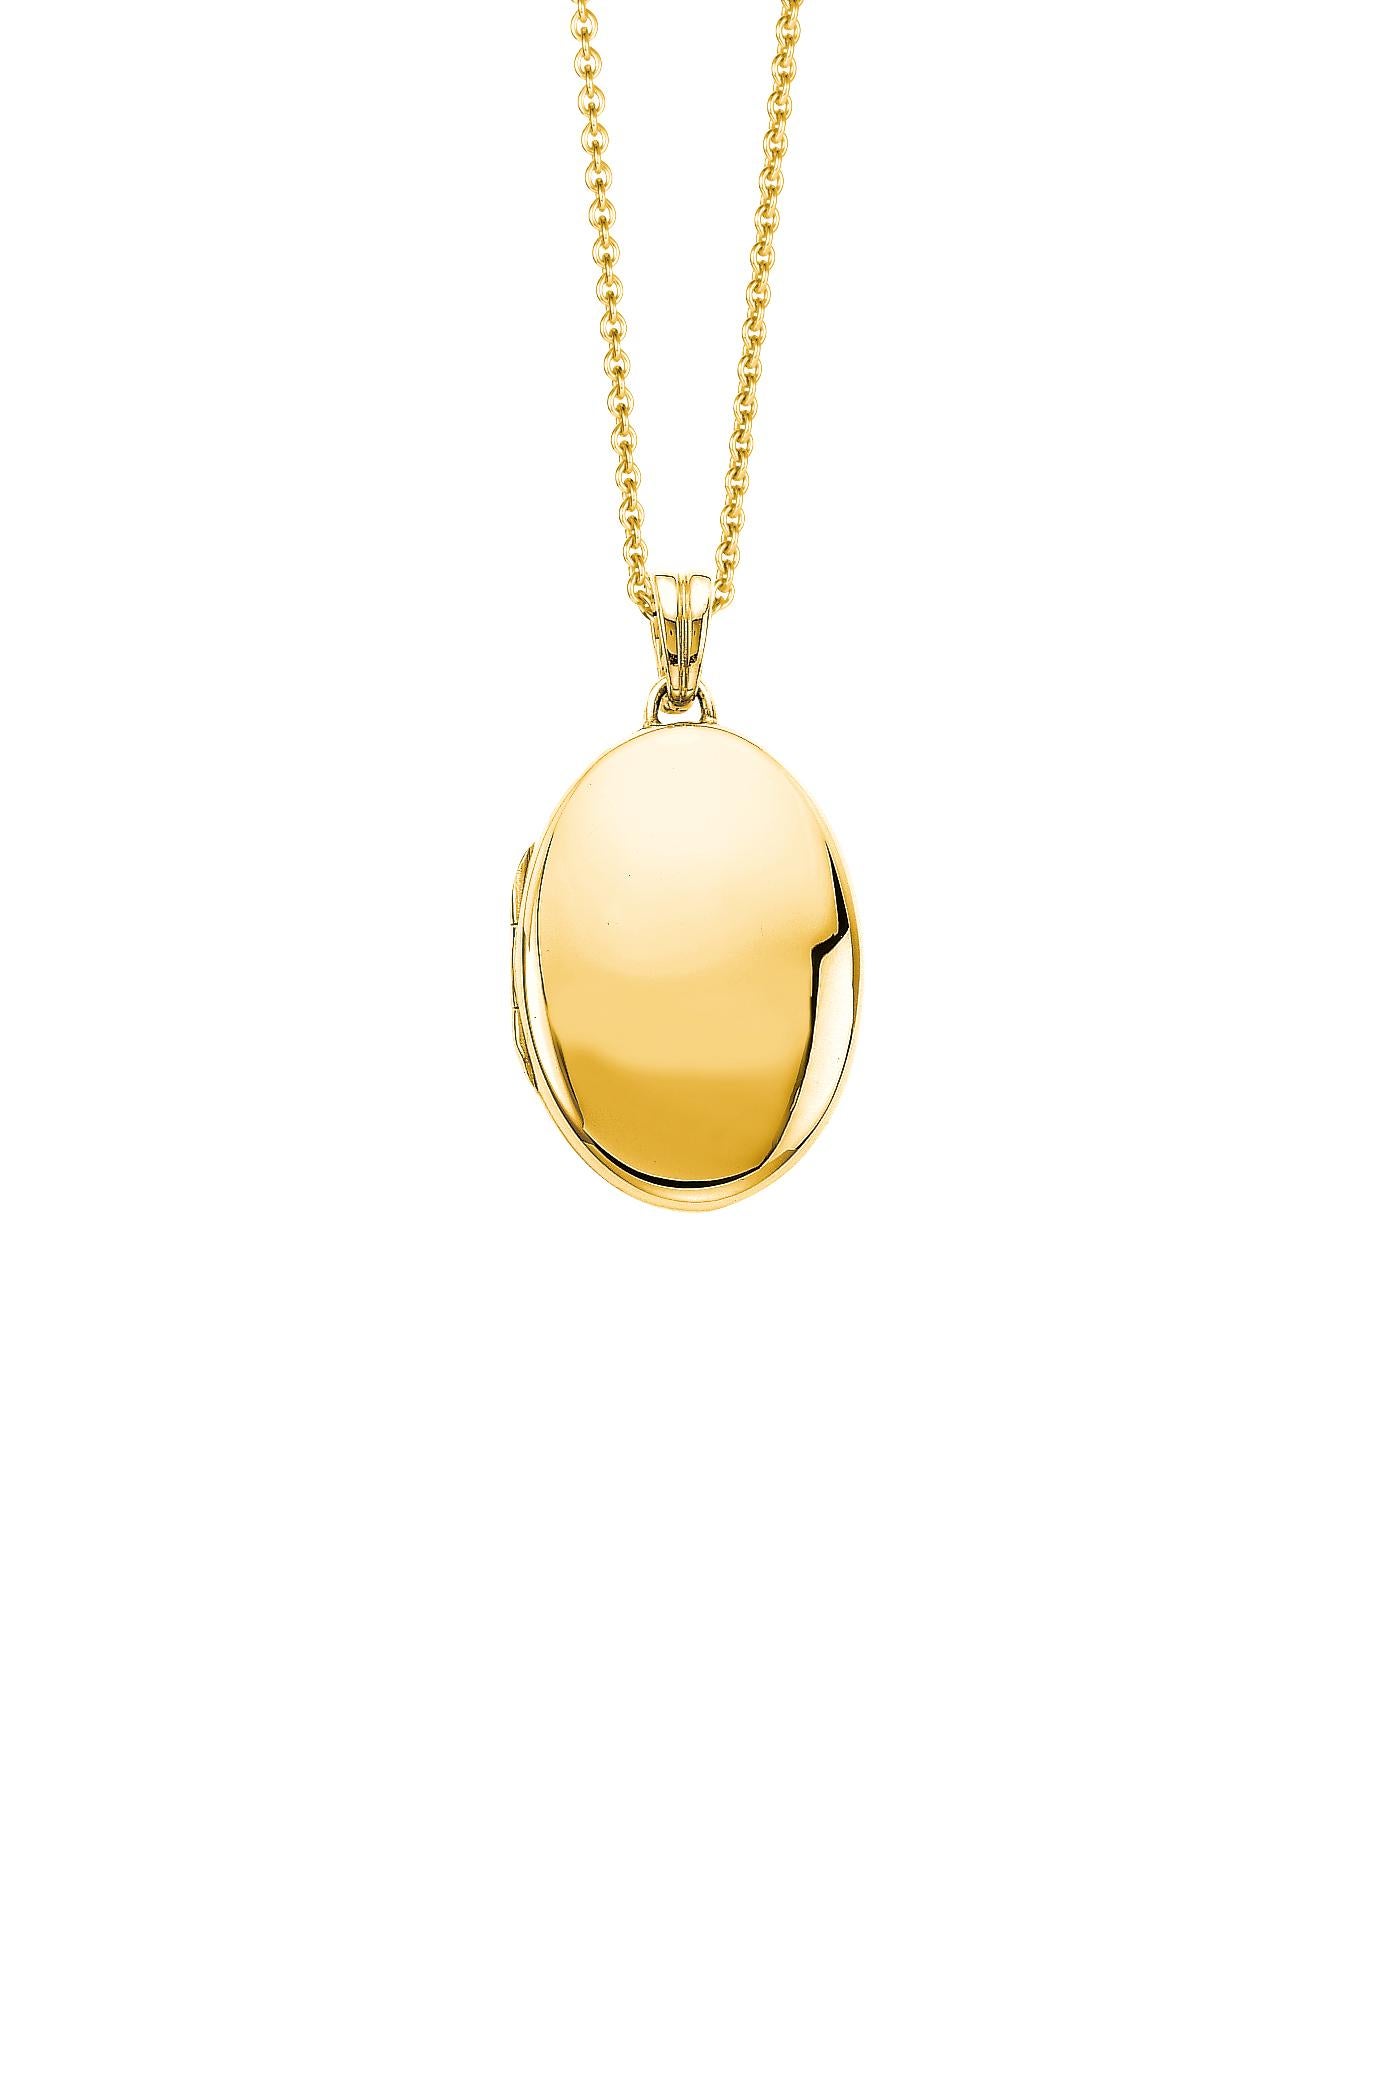 Victor Mayer customizable oval polished pendant locket 18k yellow gold, Hallmark Collection, measurements app. 25.0 mm x 36.0 mm

About the creator Victor Mayer
Victor Mayer is internationally renowned for elegant timeless designs and unrivalled